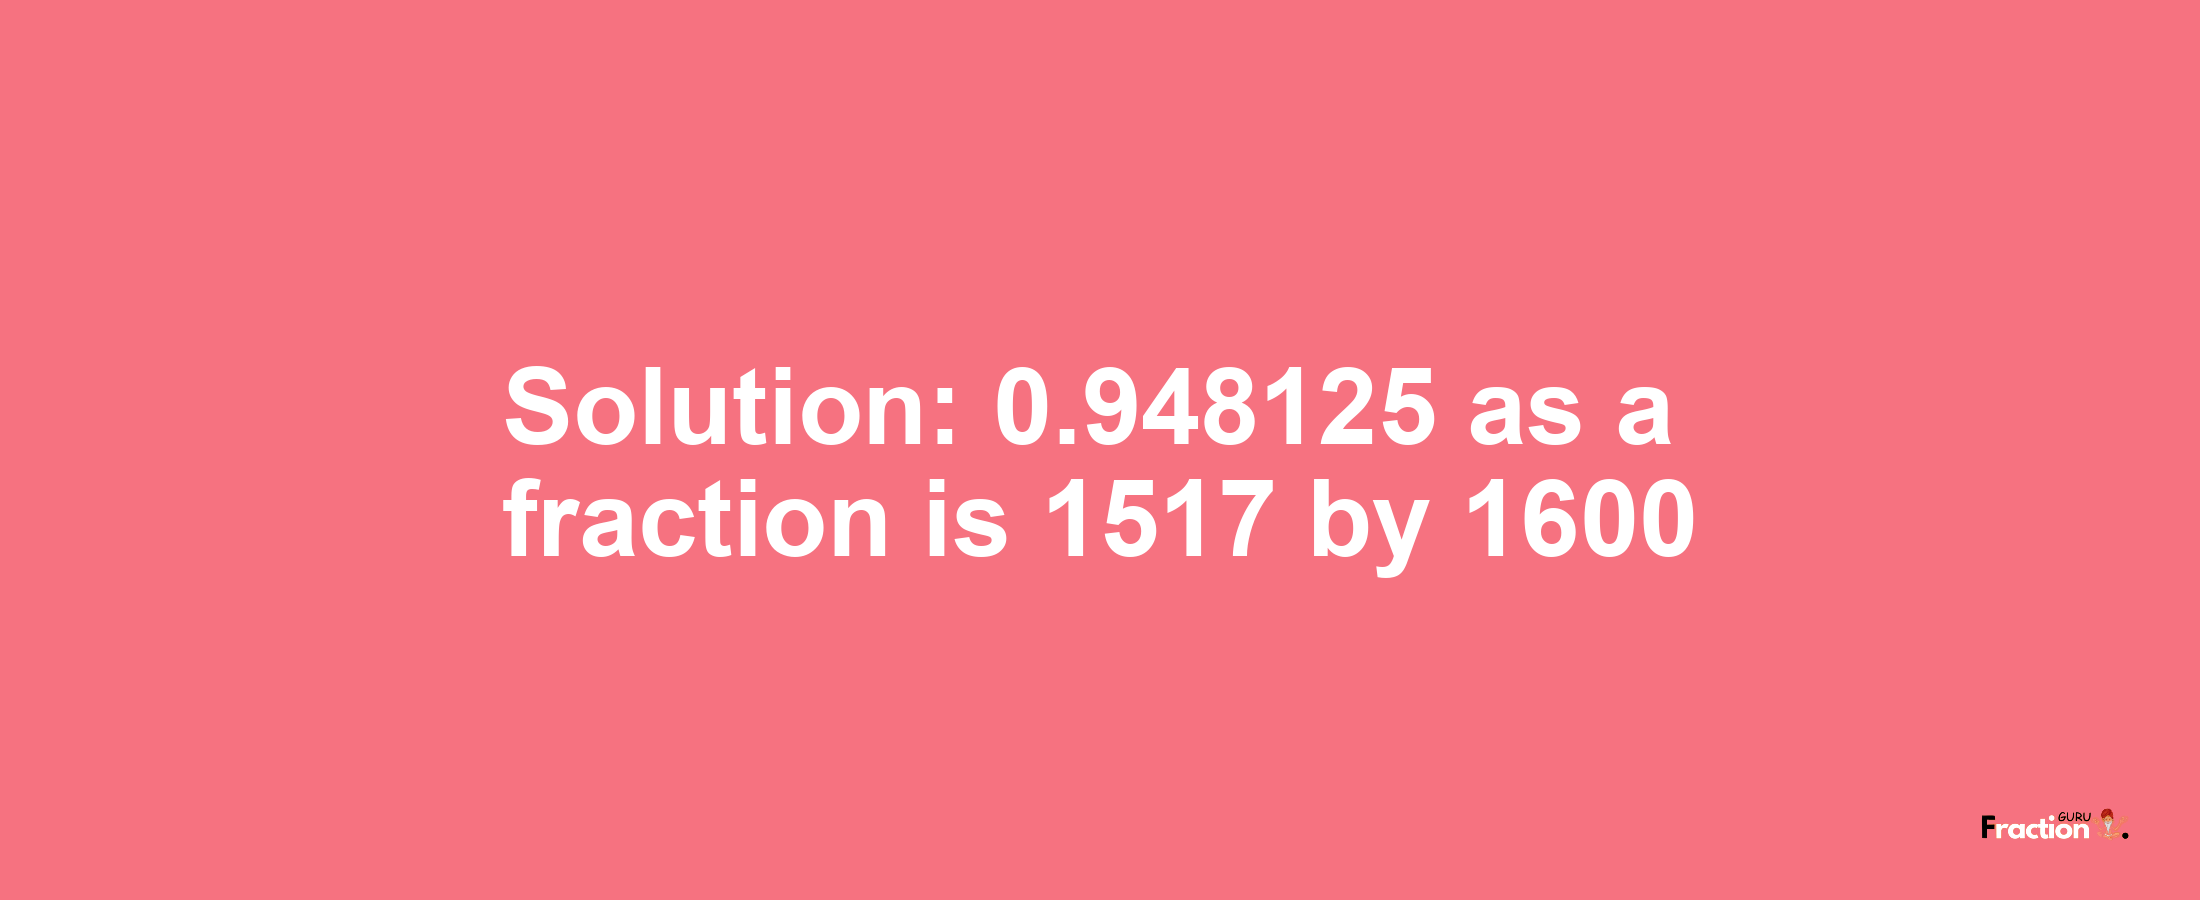 Solution:0.948125 as a fraction is 1517/1600